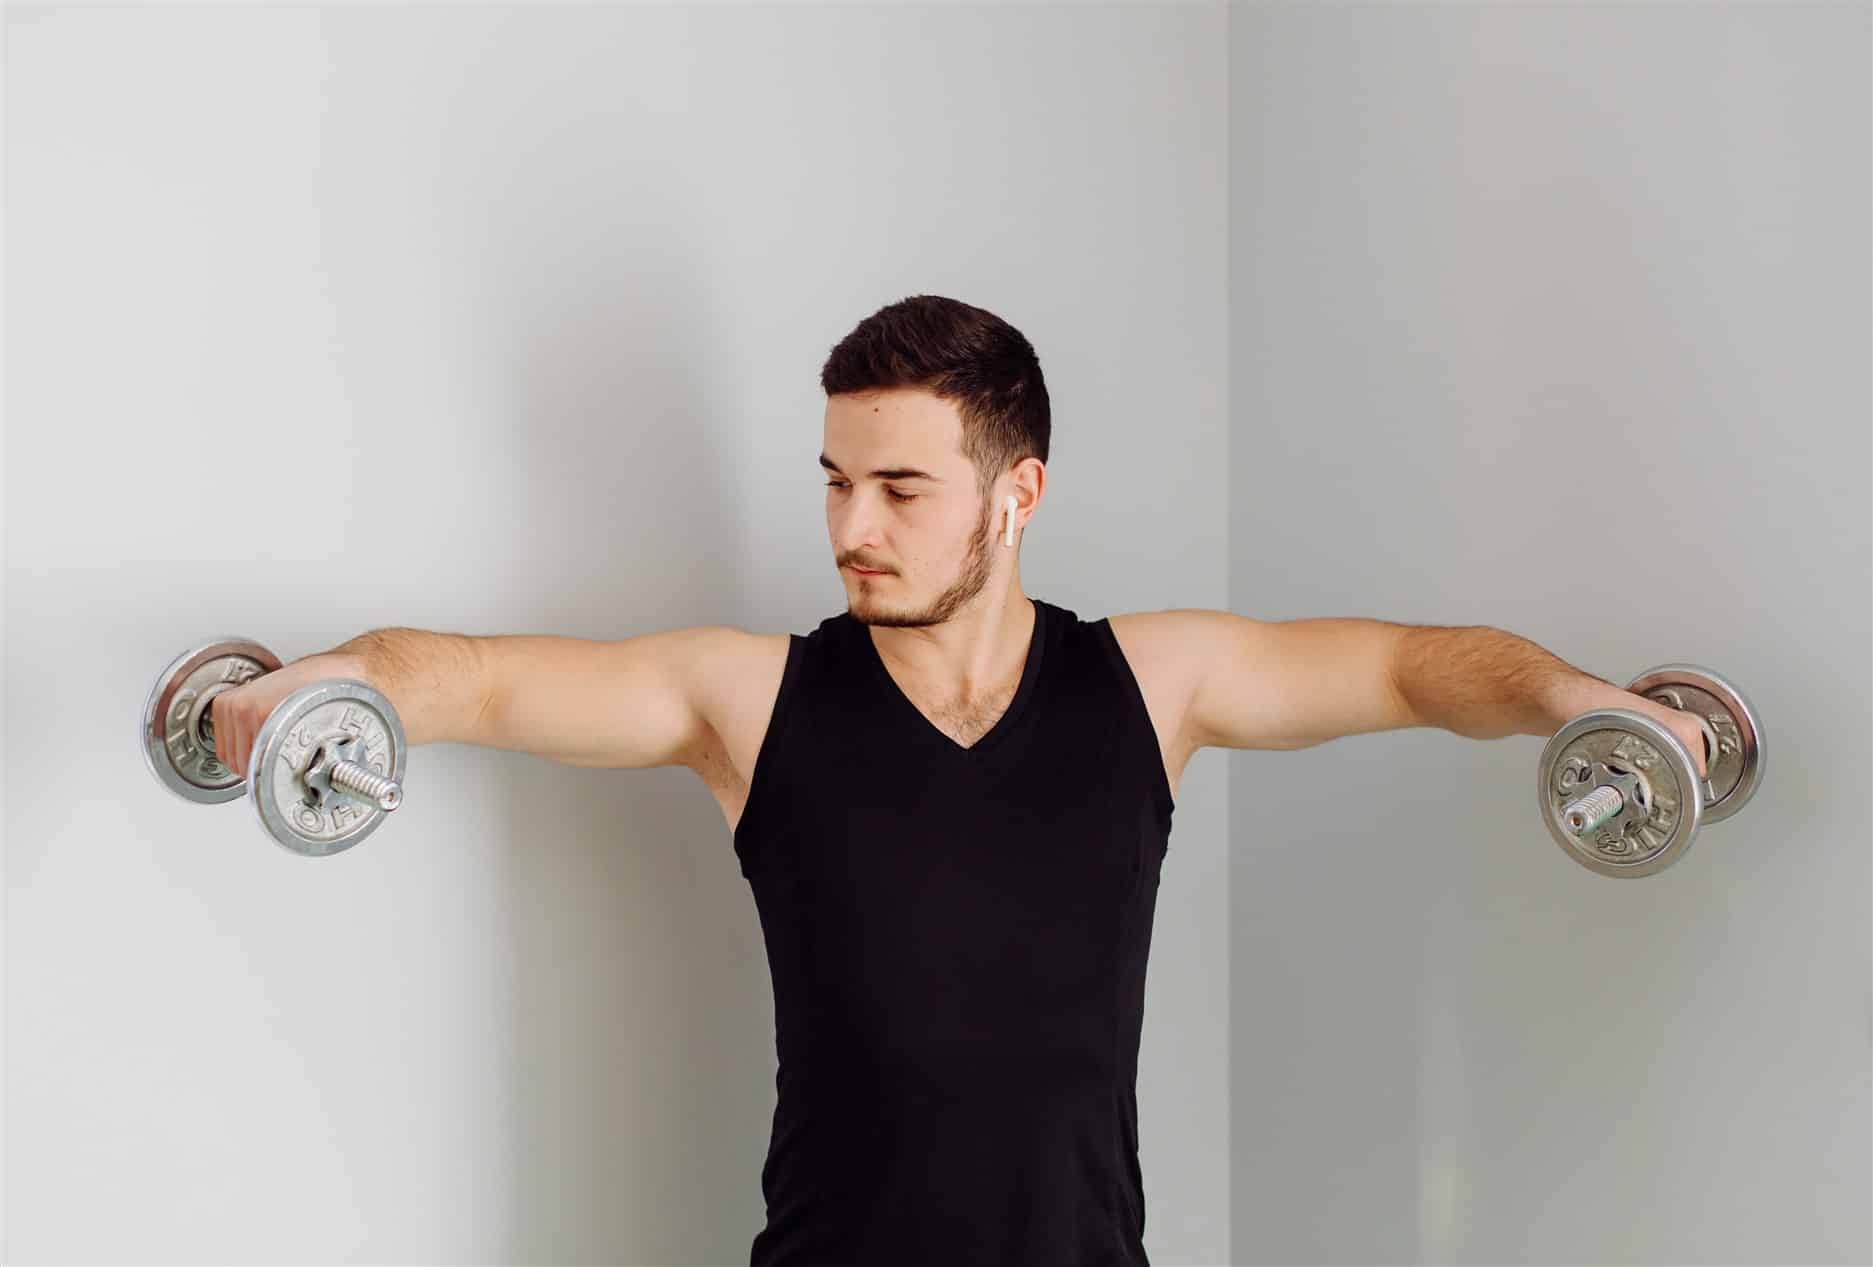 Power Up Your Forearms: 6 Best Forearm Exercises For Mass You Need To Try